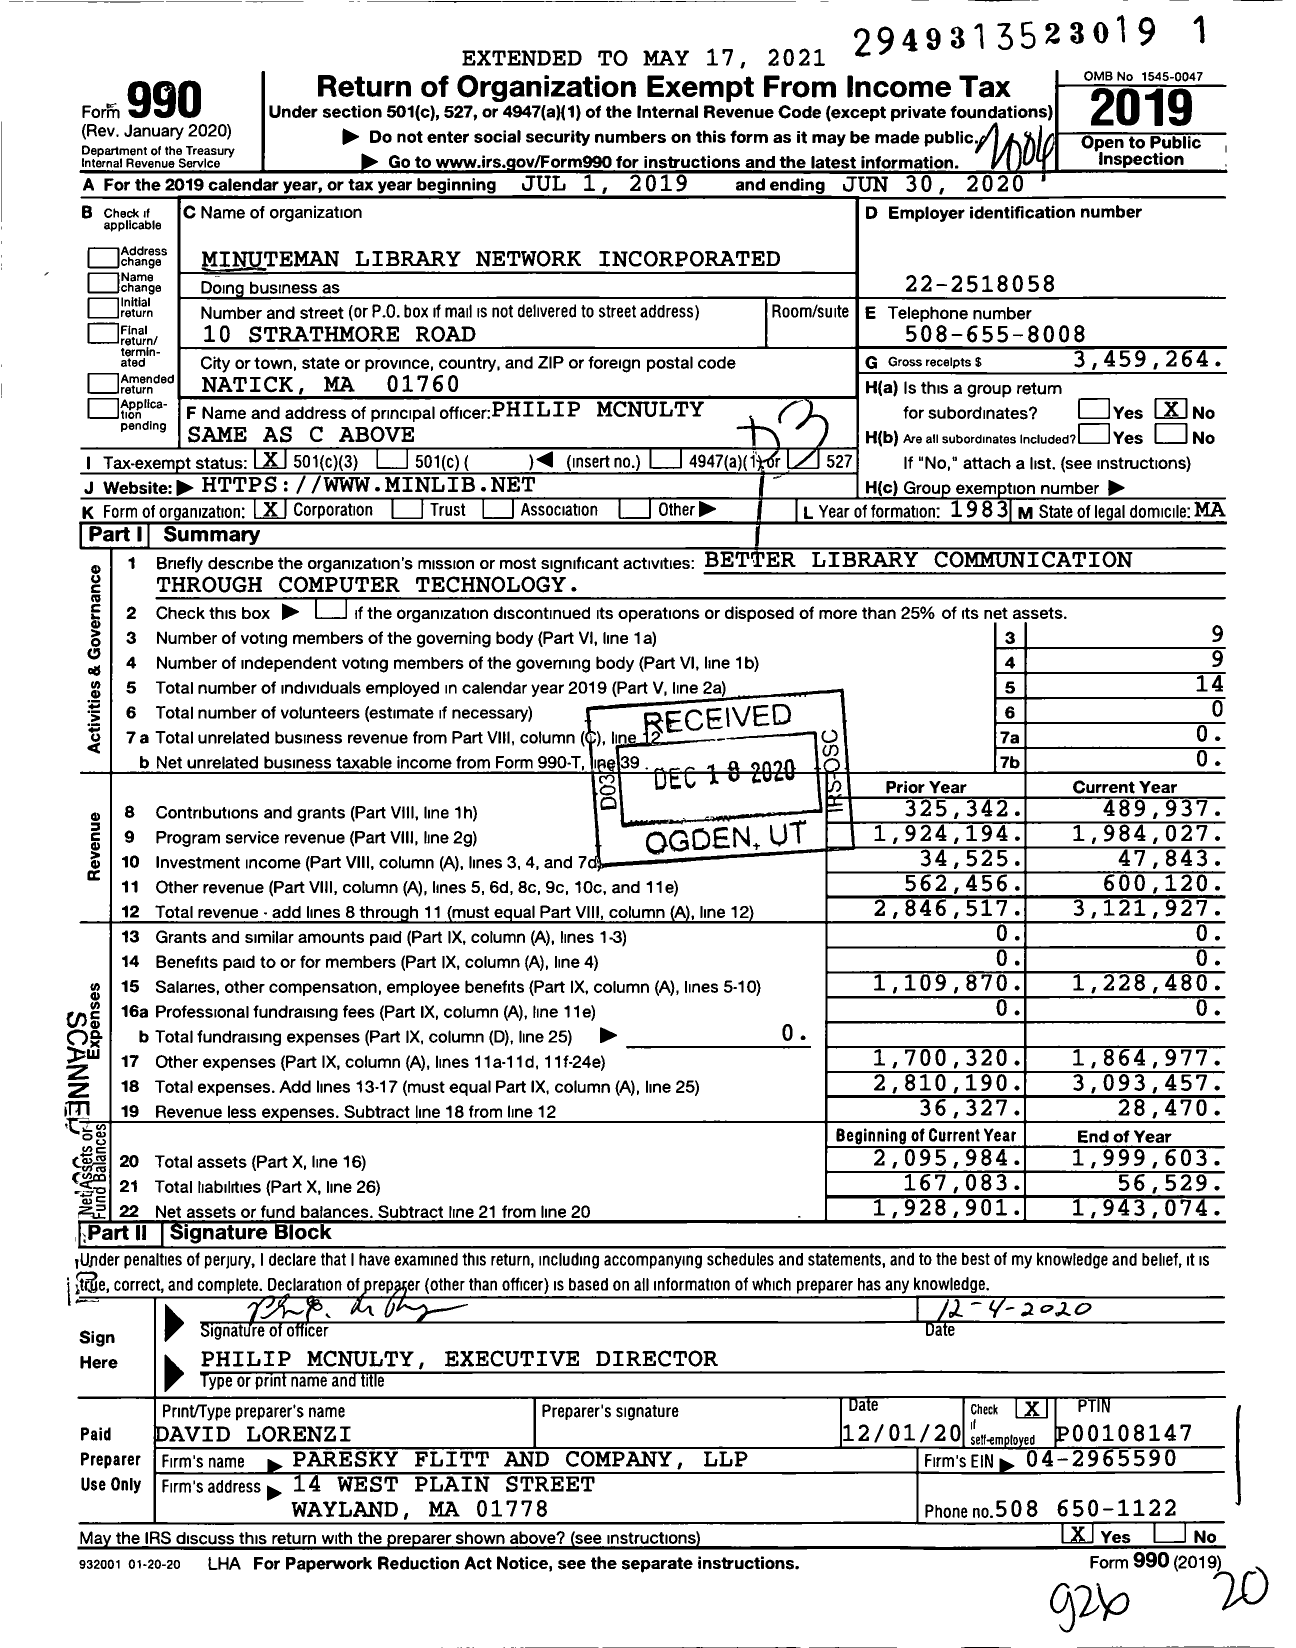 Image of first page of 2019 Form 990 for Minuteman Library Network Incorporated (MLN)